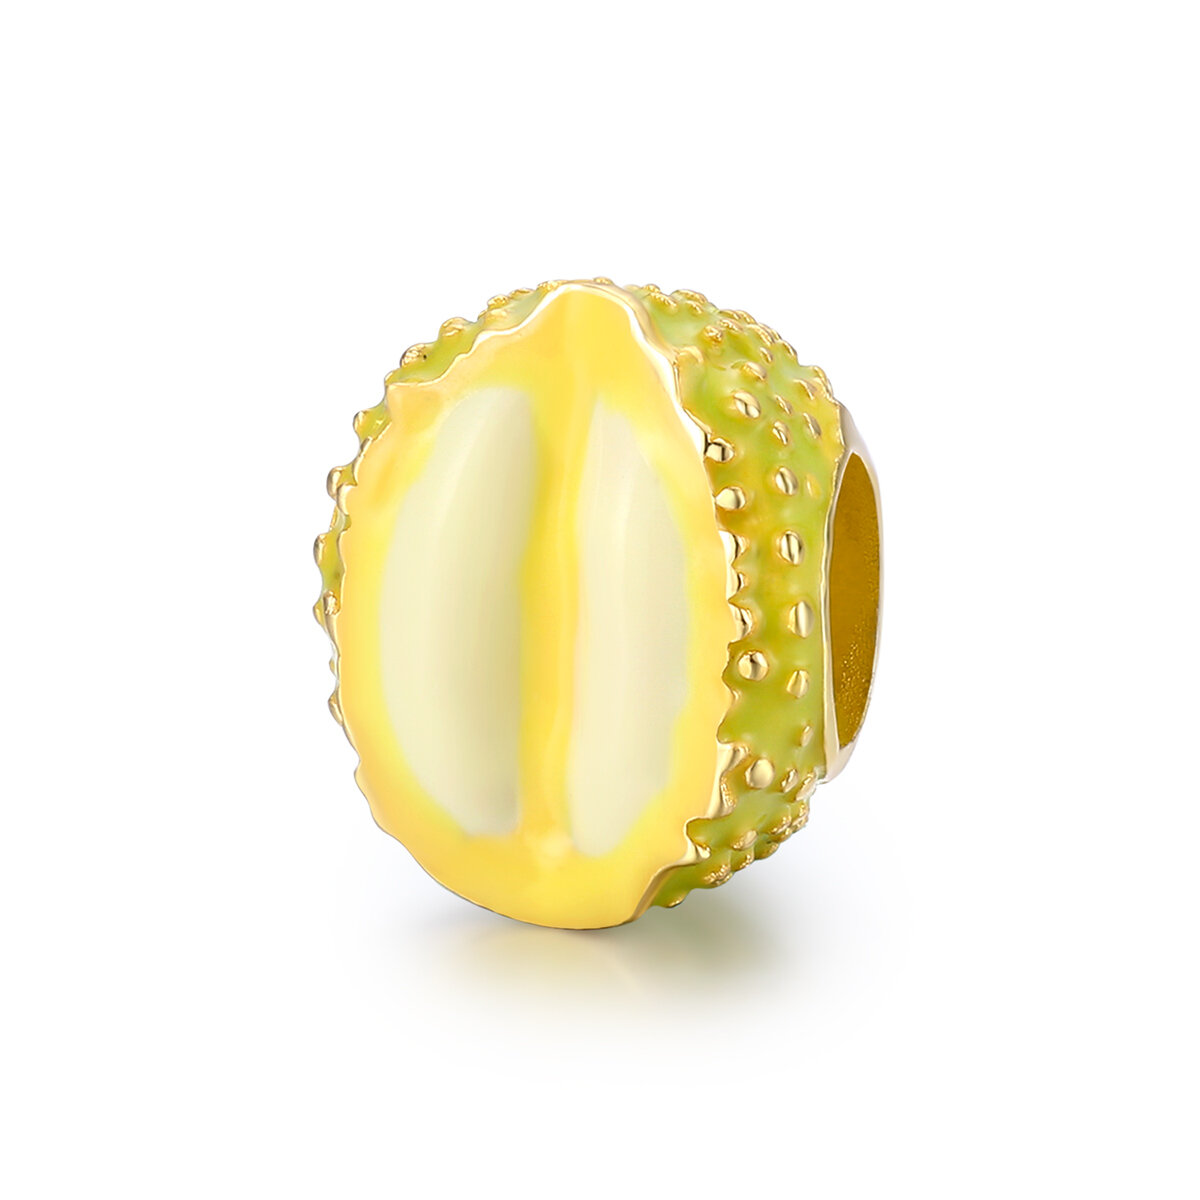 GemKing BSC402 Durian Charm S925 Sterling Silver Charm